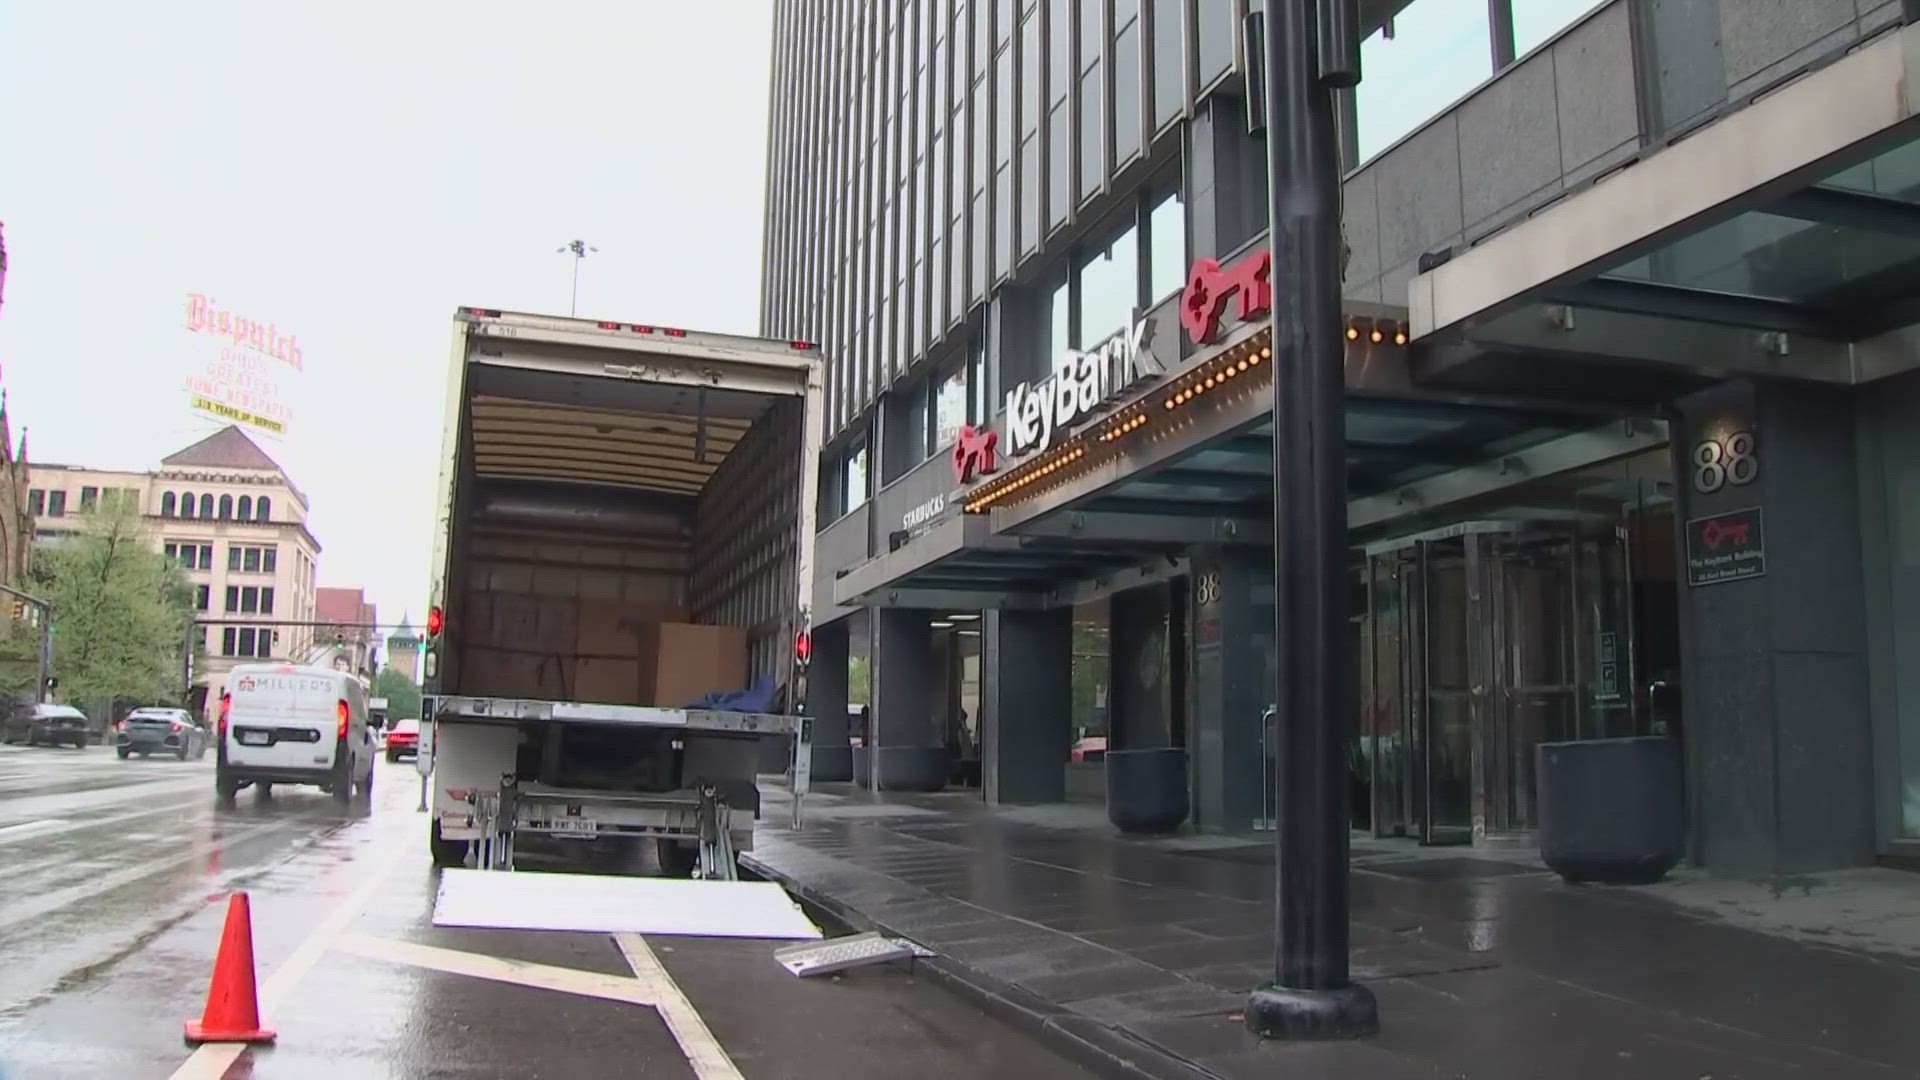 Several tenants in the KeyBank tower have moved out after complaints about unreliable services under new ownership.